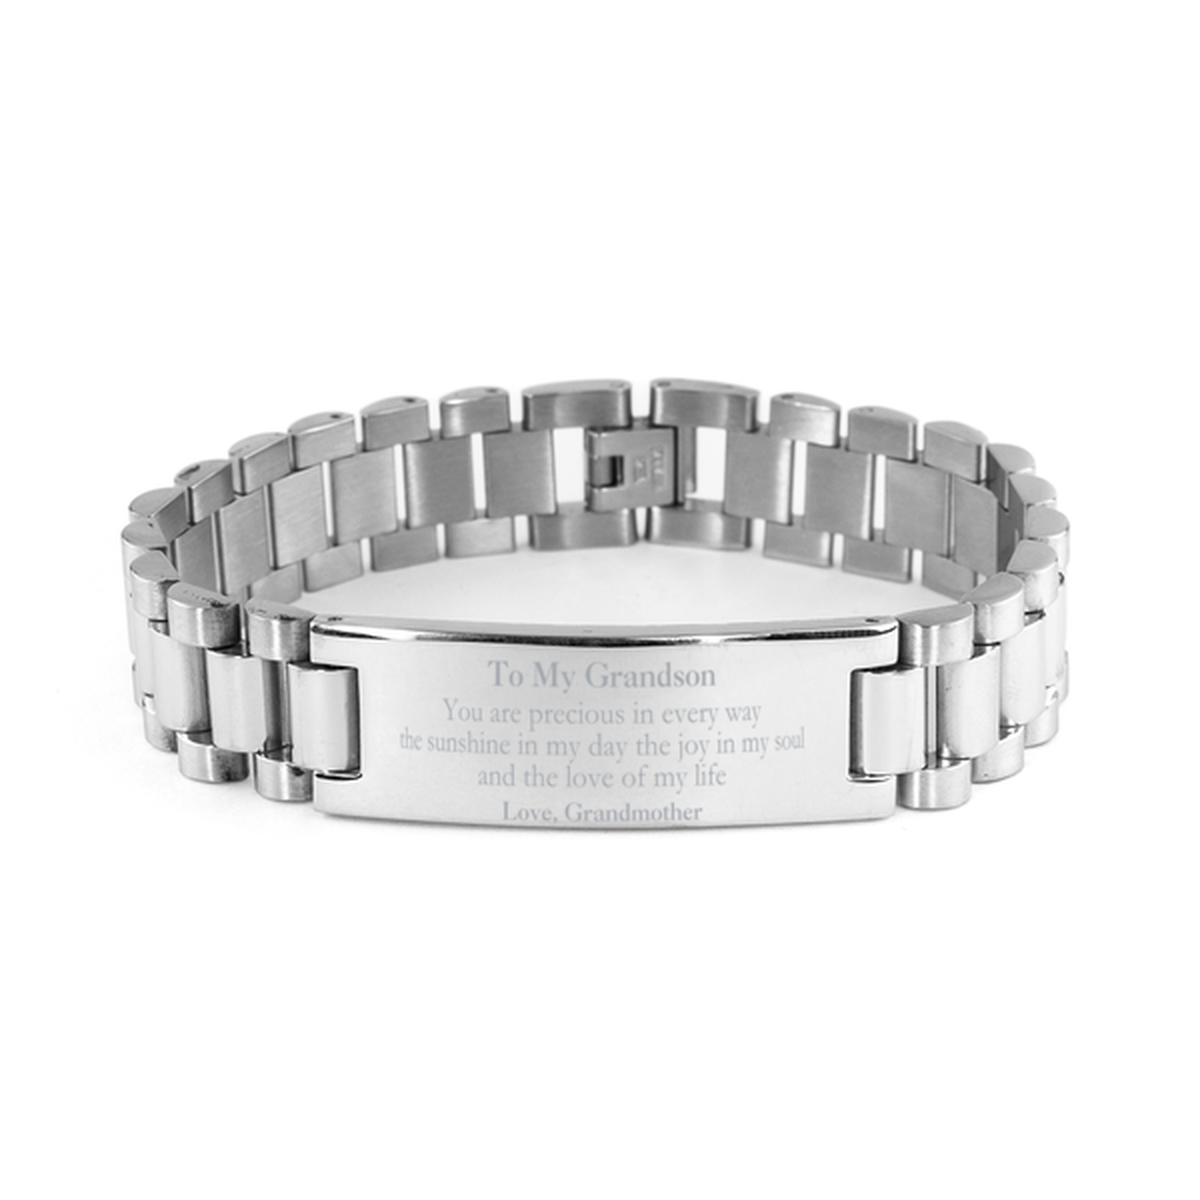 Graduation Gifts for Grandson Ladder Stainless Steel Bracelet Present from Grandmother, Christmas Grandson Birthday Gifts Grandson You are precious in every way the sunshine in my day. Love, Grandmother